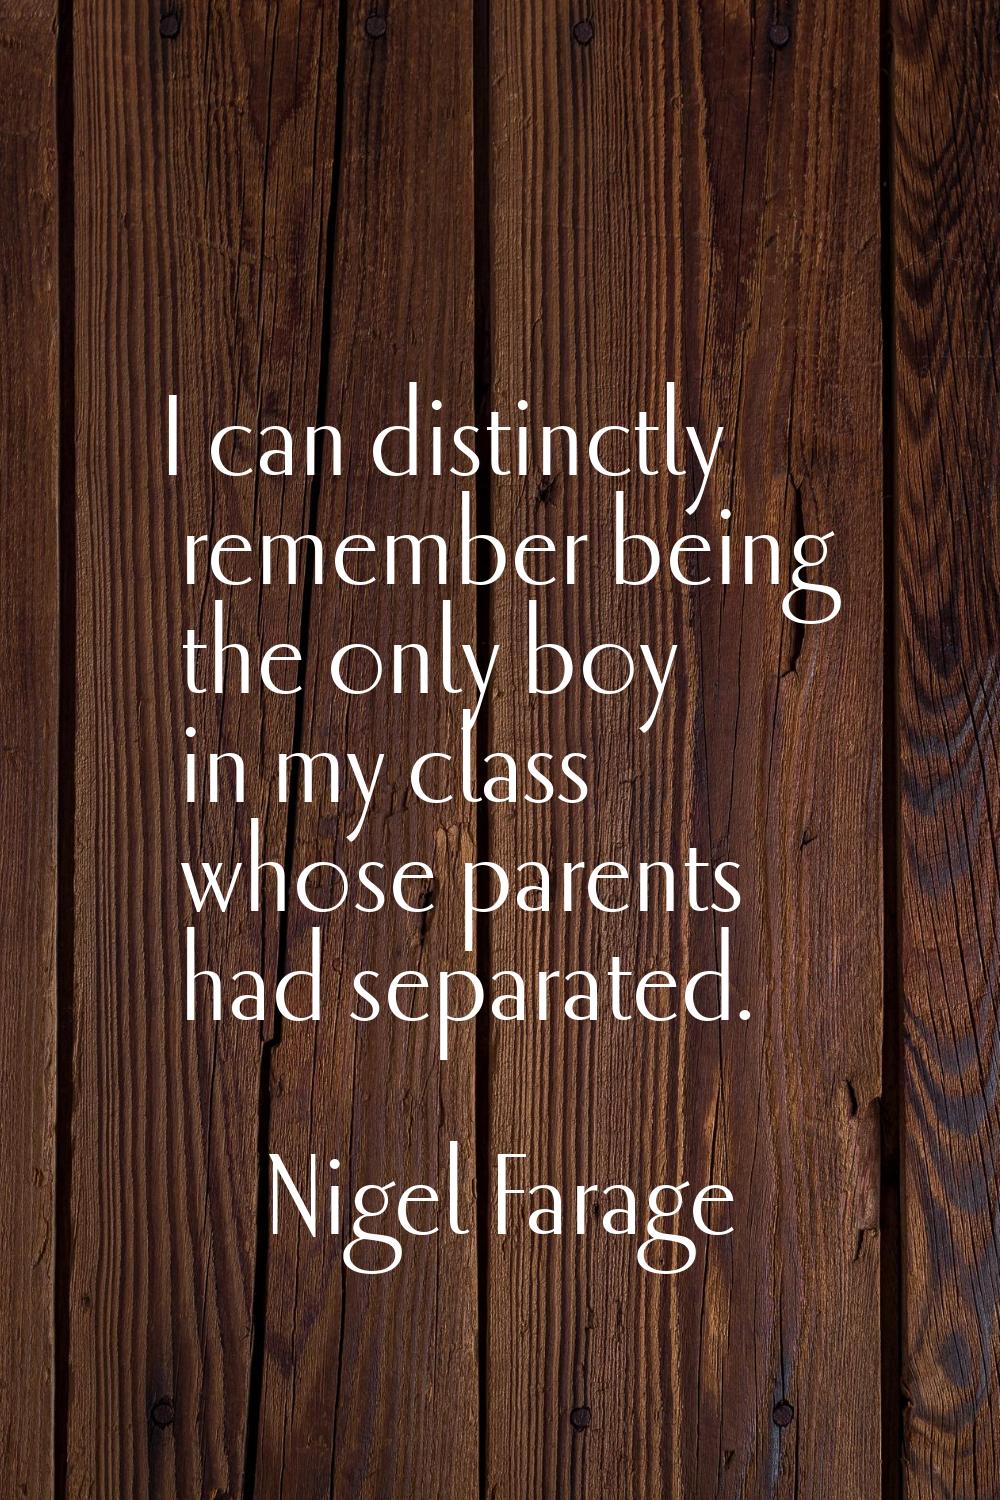 I can distinctly remember being the only boy in my class whose parents had separated.